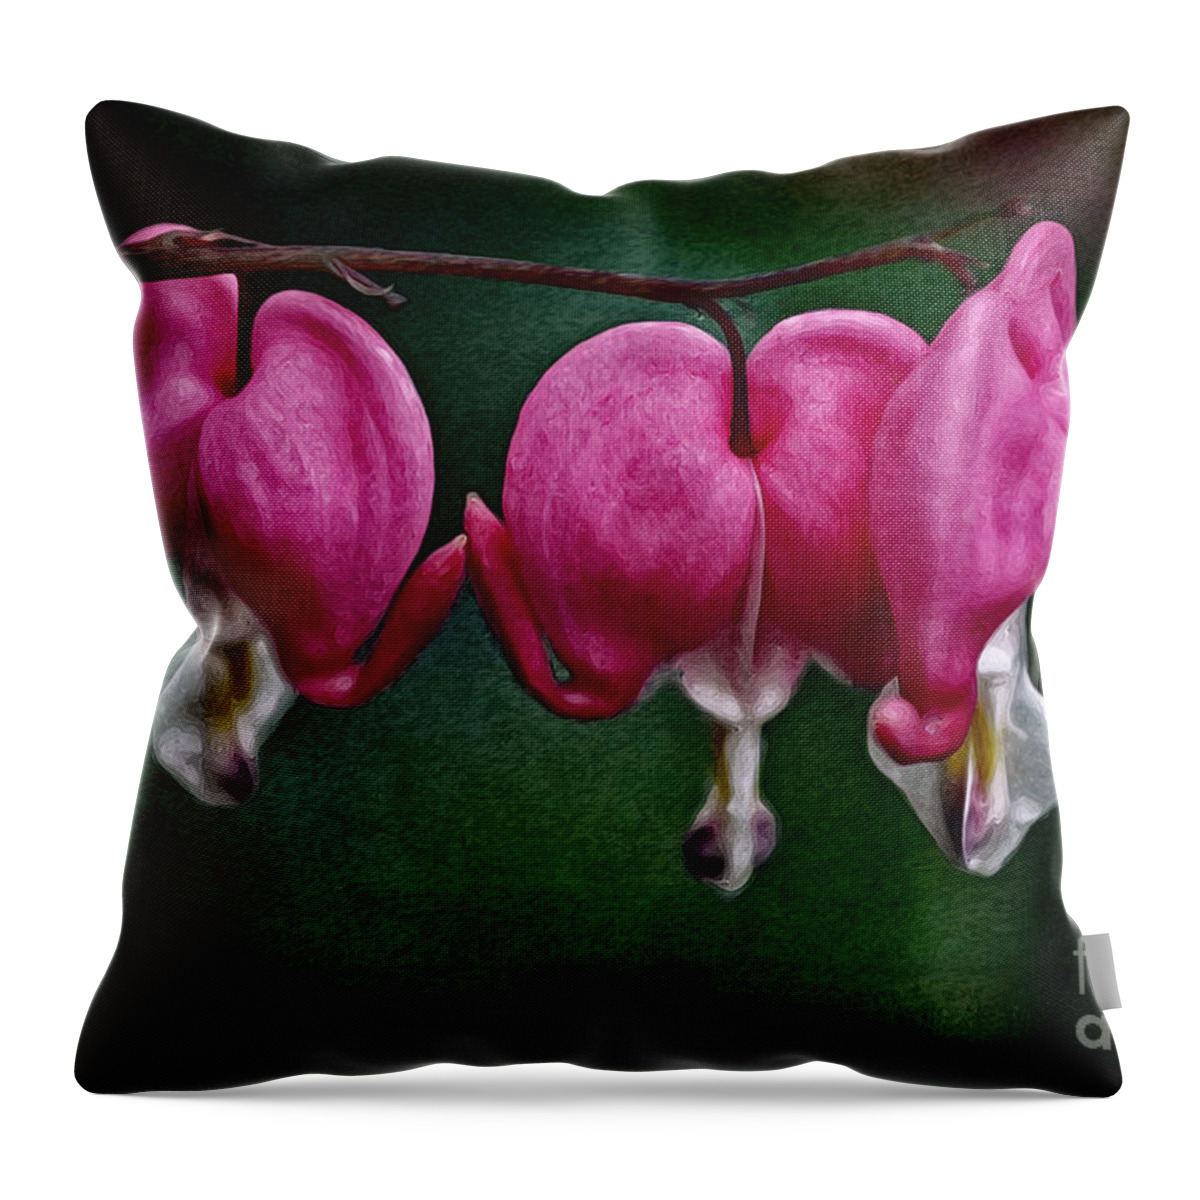 Find Your Heart Throw Pillow featuring the photograph Find Your Heart by Mary Machare